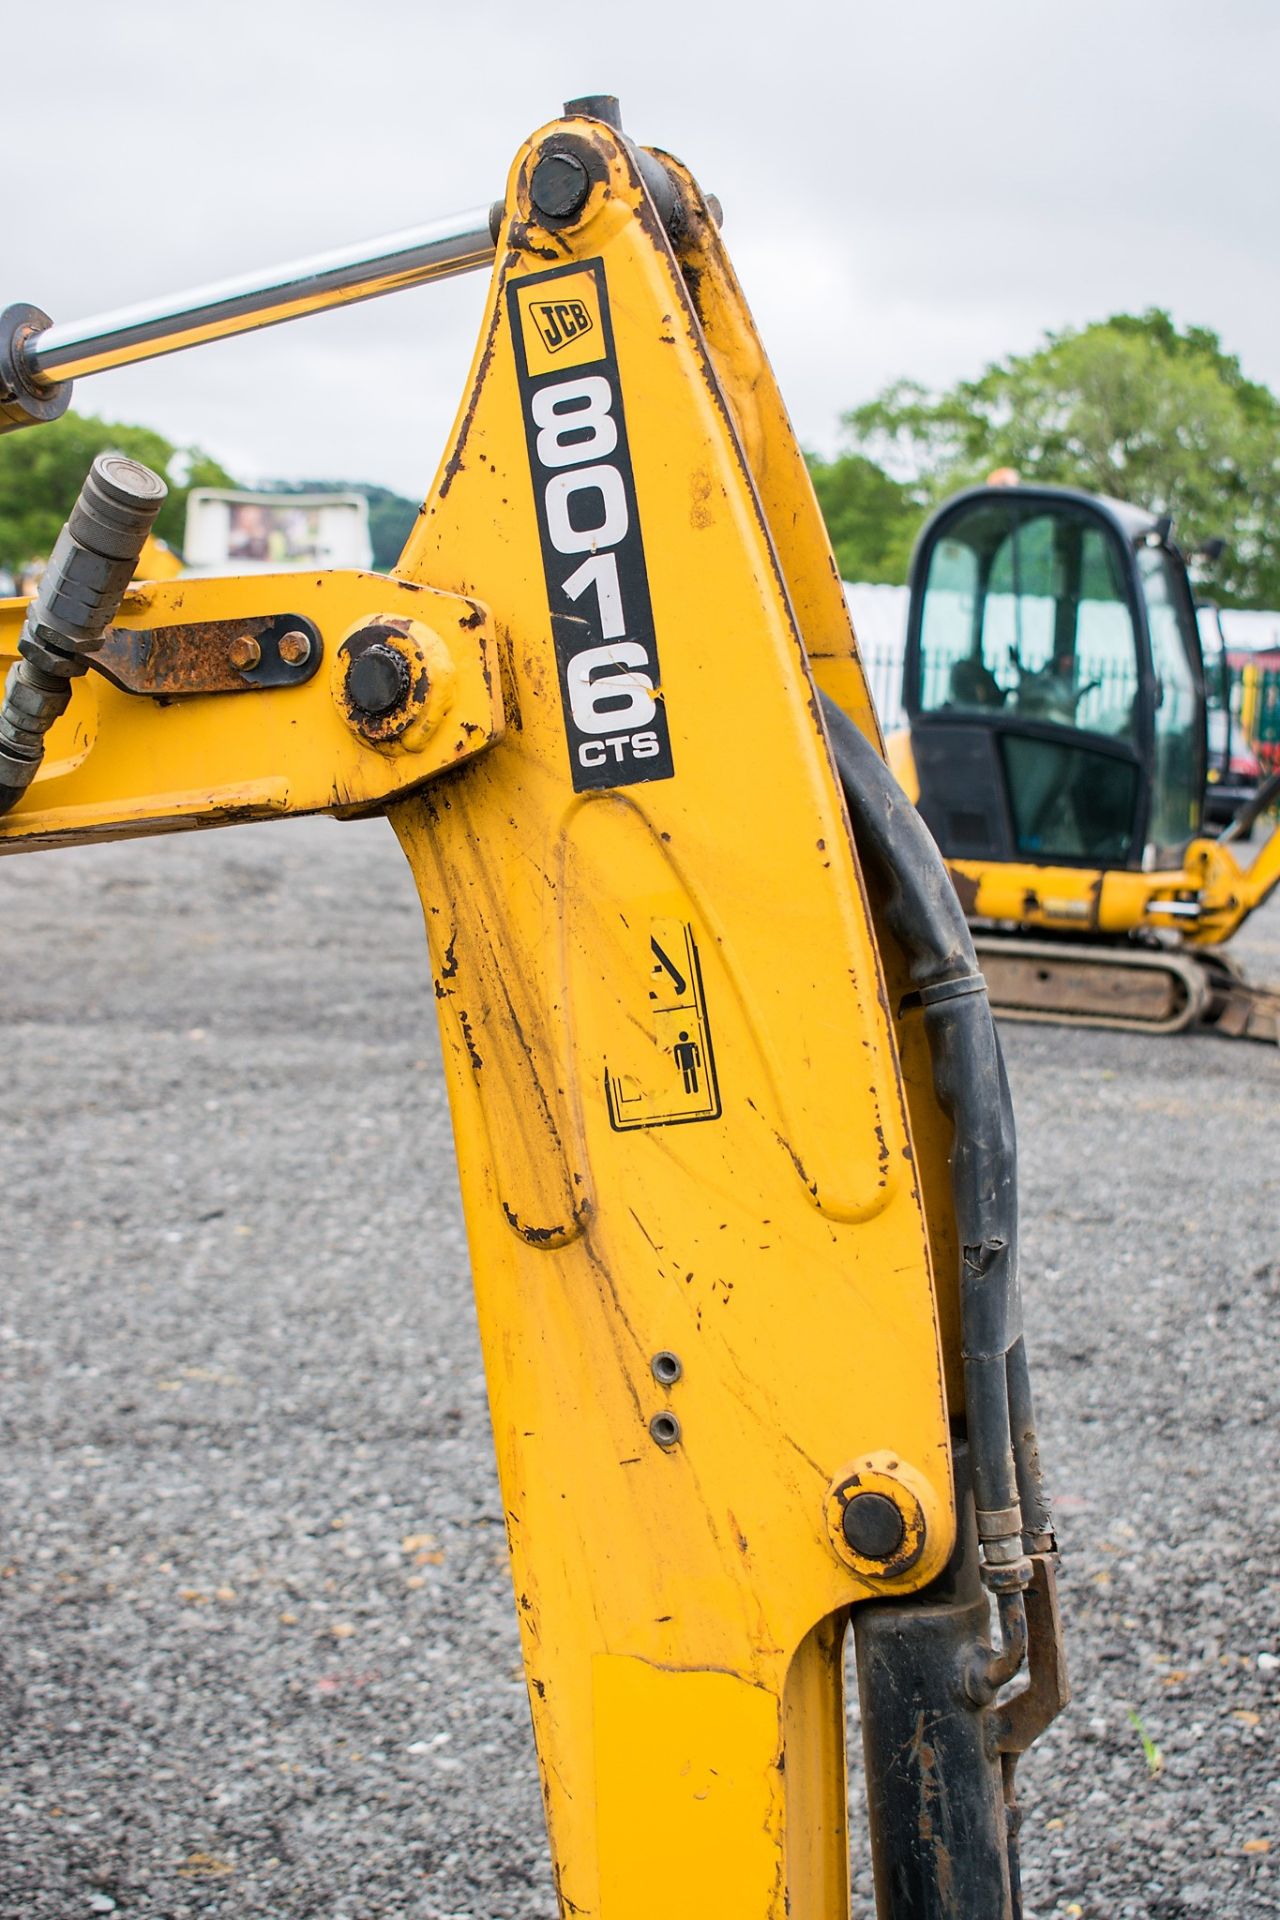 JCB 8016 CTS 1.5 tonne rubber tracked mini excavator Year: 2014 S/N: 2071572 Recorded Hours: 1974 - Image 14 of 25